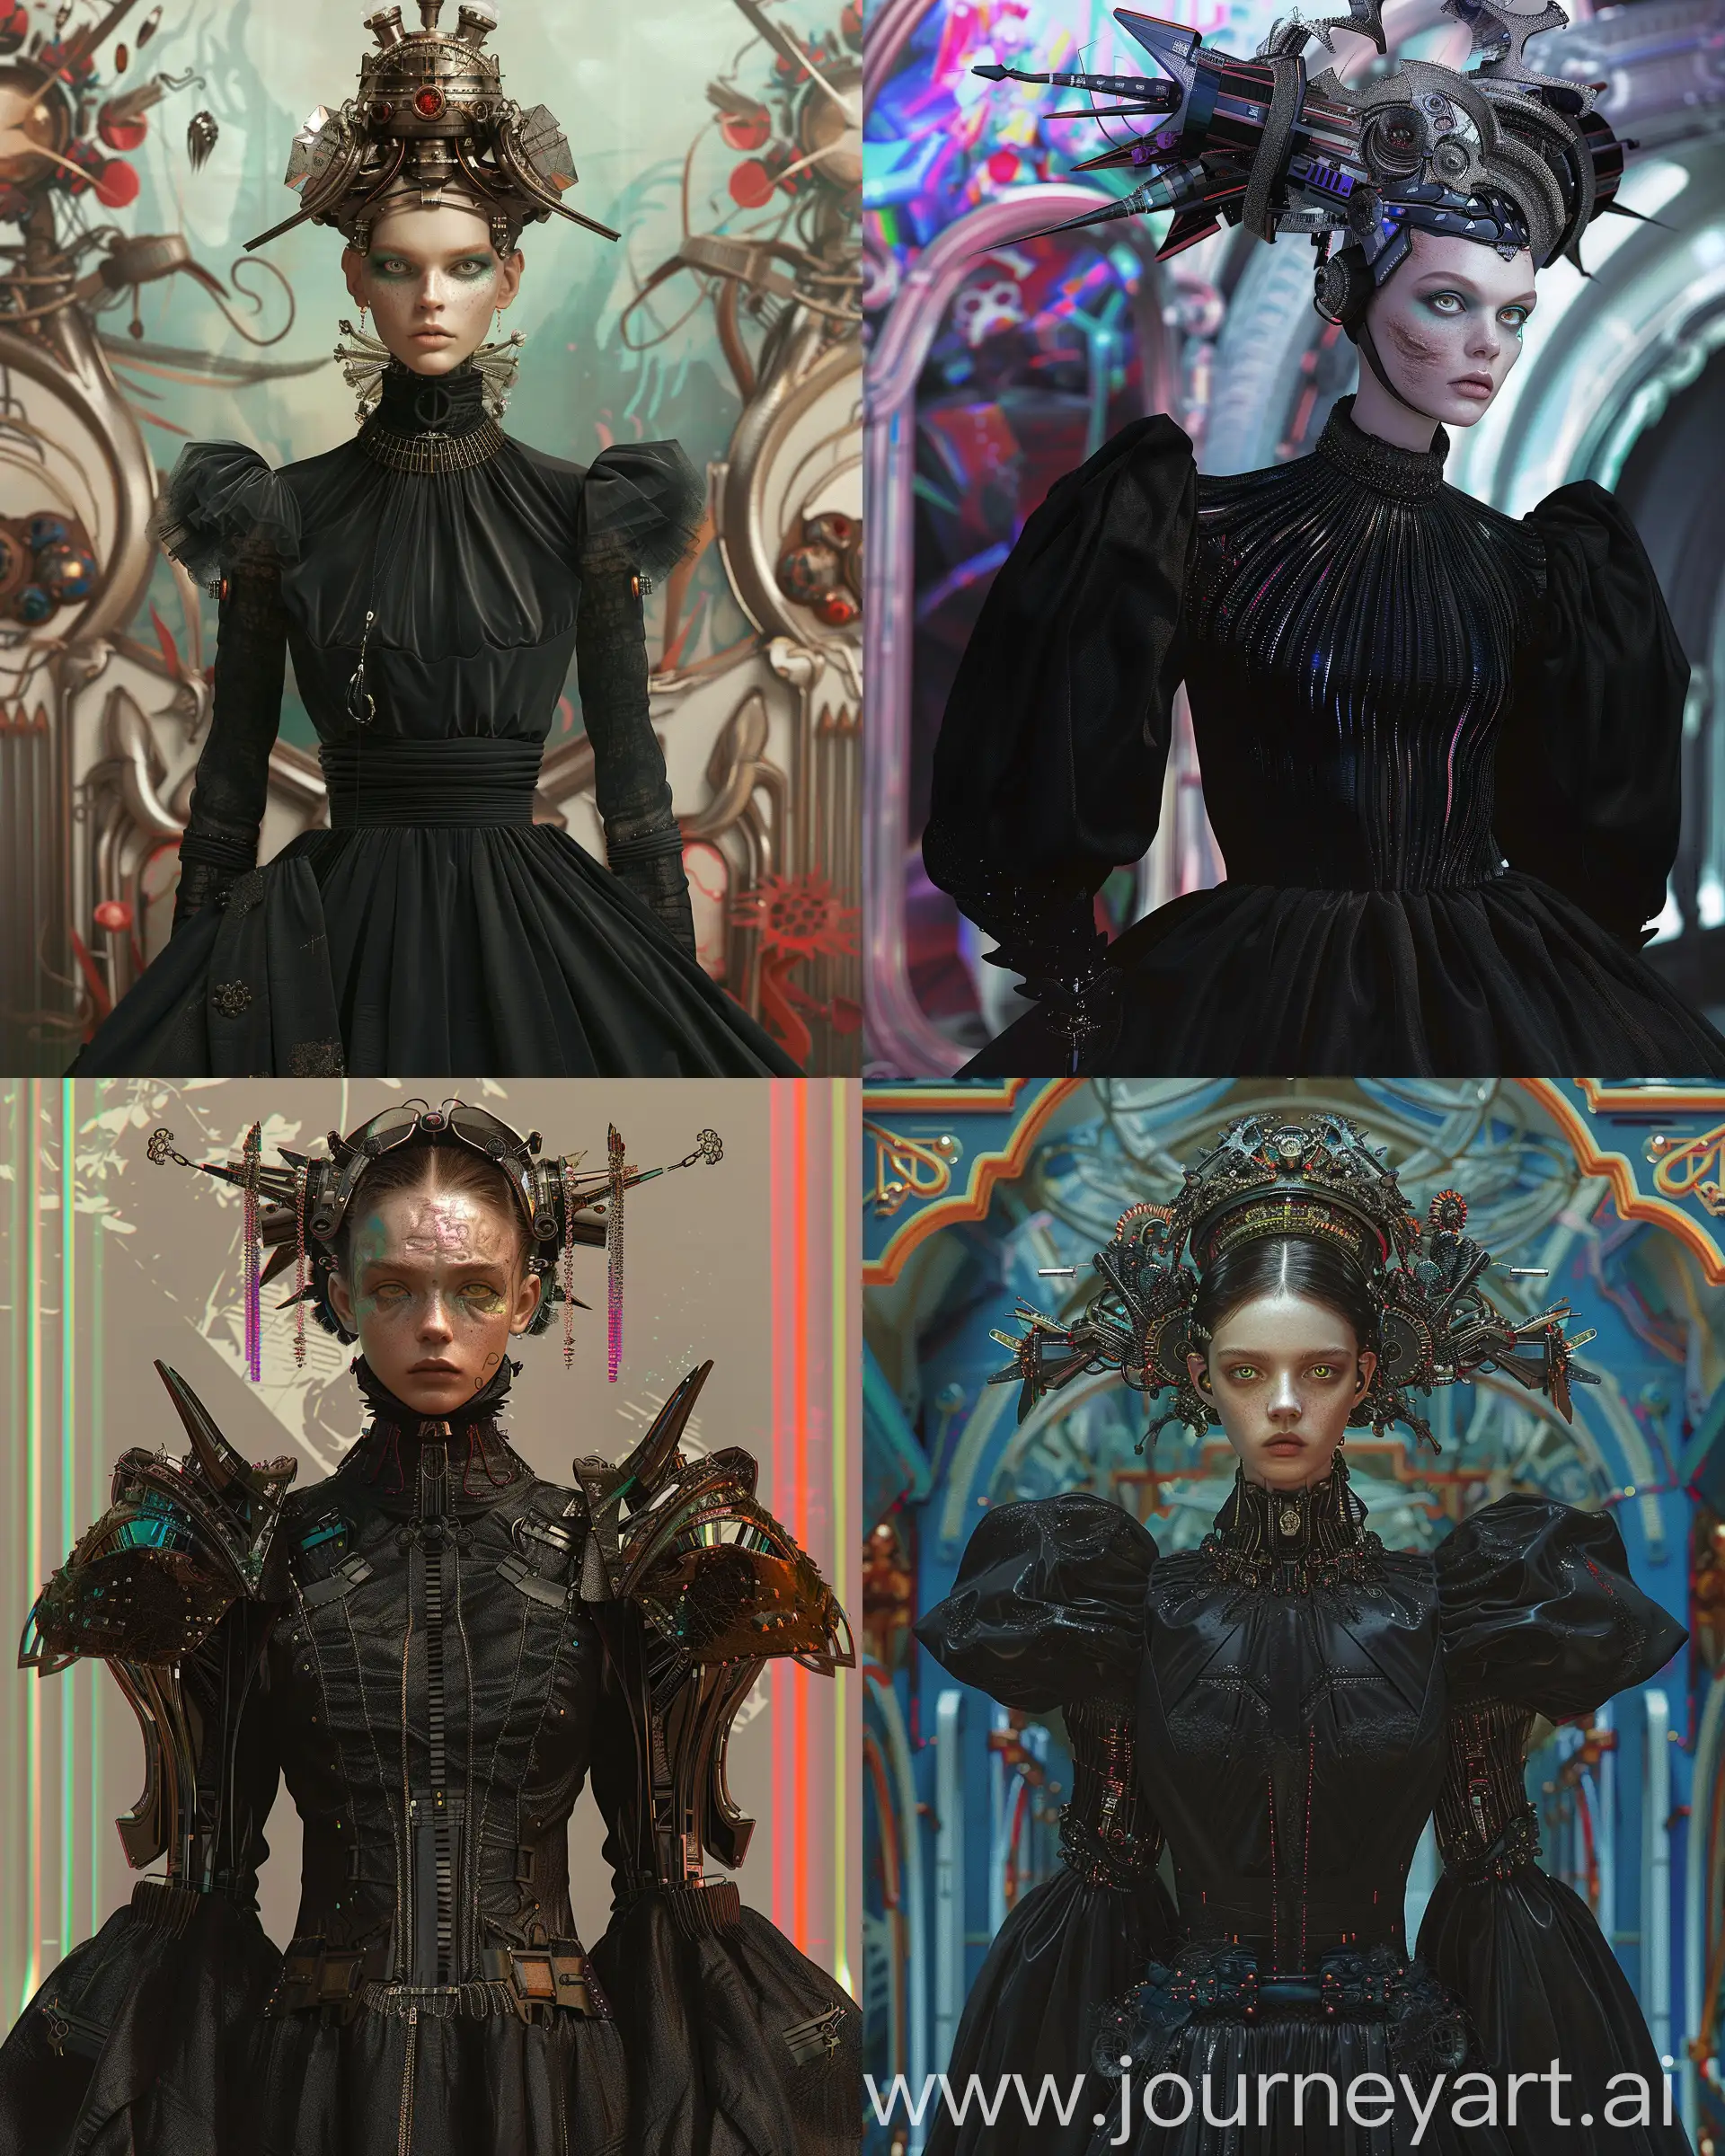 dark Fashion model lady as eerie android creature in a sleek black merge dress with accessories and futuristic armor, inspired by Anne Bachelier, Aaron Horkey, Josan Gonzalez, and Ian McQue. Crispy, detailed image with colorful, fashionable elements. Background matches the theme, with subtle hints of android nature and futuristic setting. Elaborate metallic head accessories for added contrast and style, focuses on a single lady, crowned with an even wider, highly details.perfect eyes, skin blemish, detailed skin. --ar 4:5 --style raw